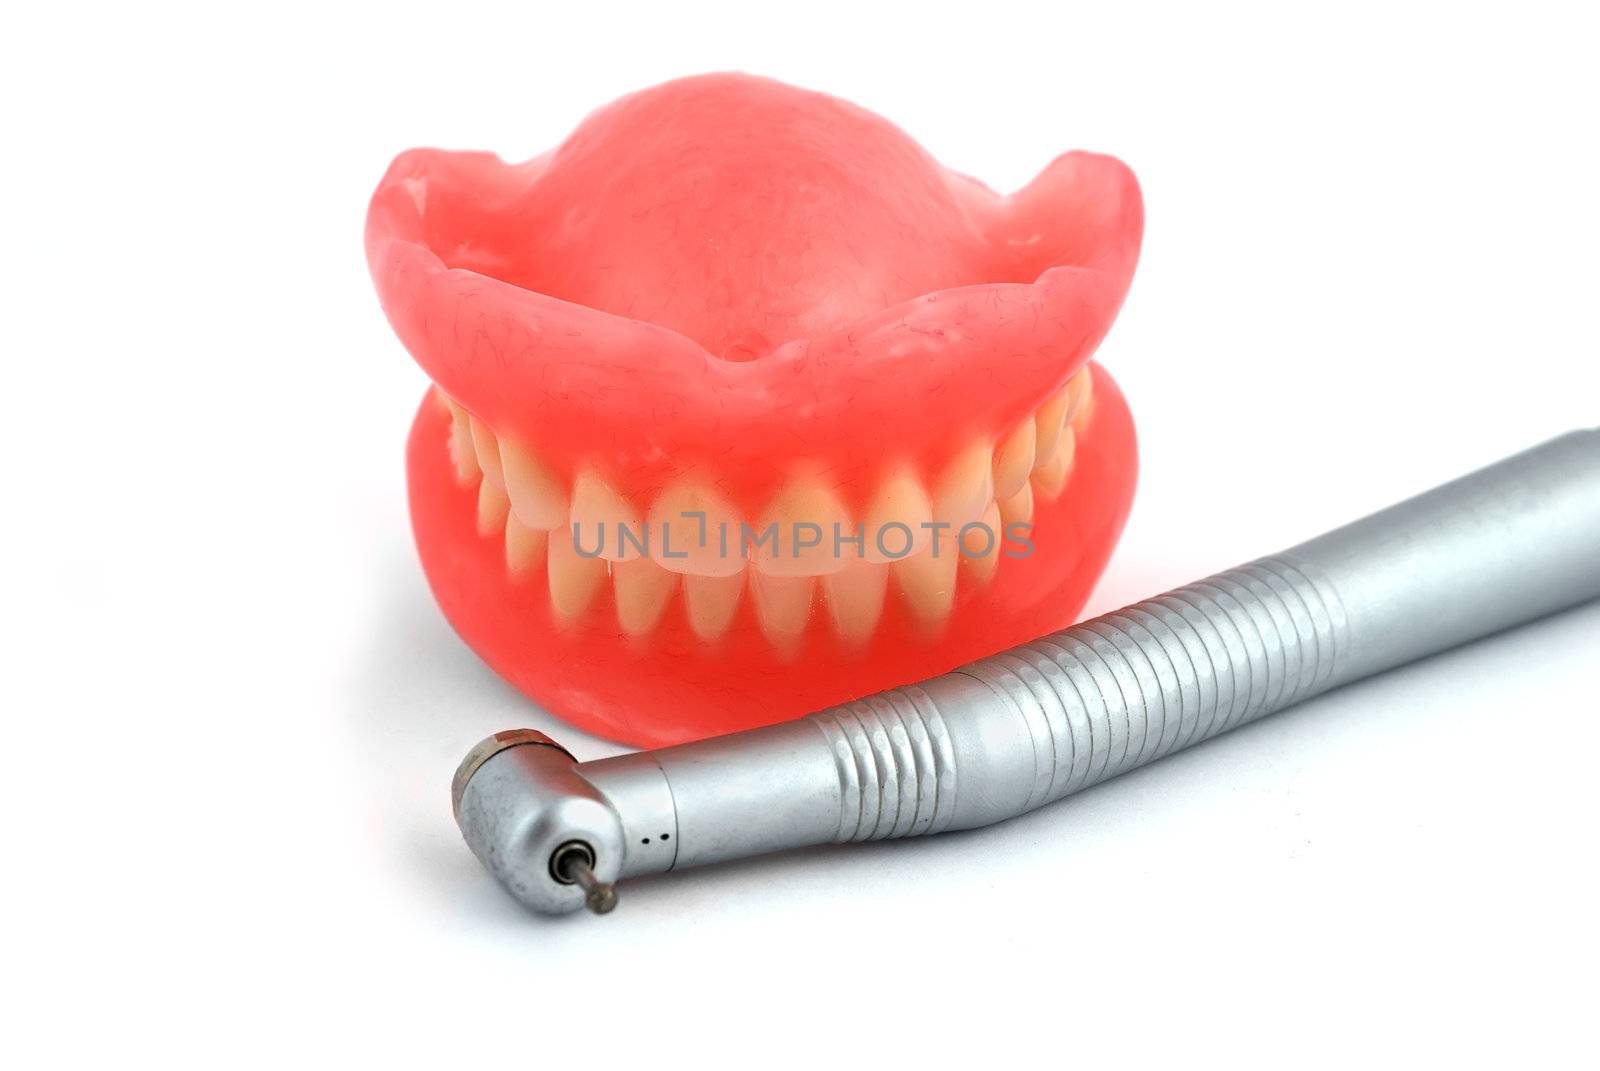 dentures and handpiece by vetkit